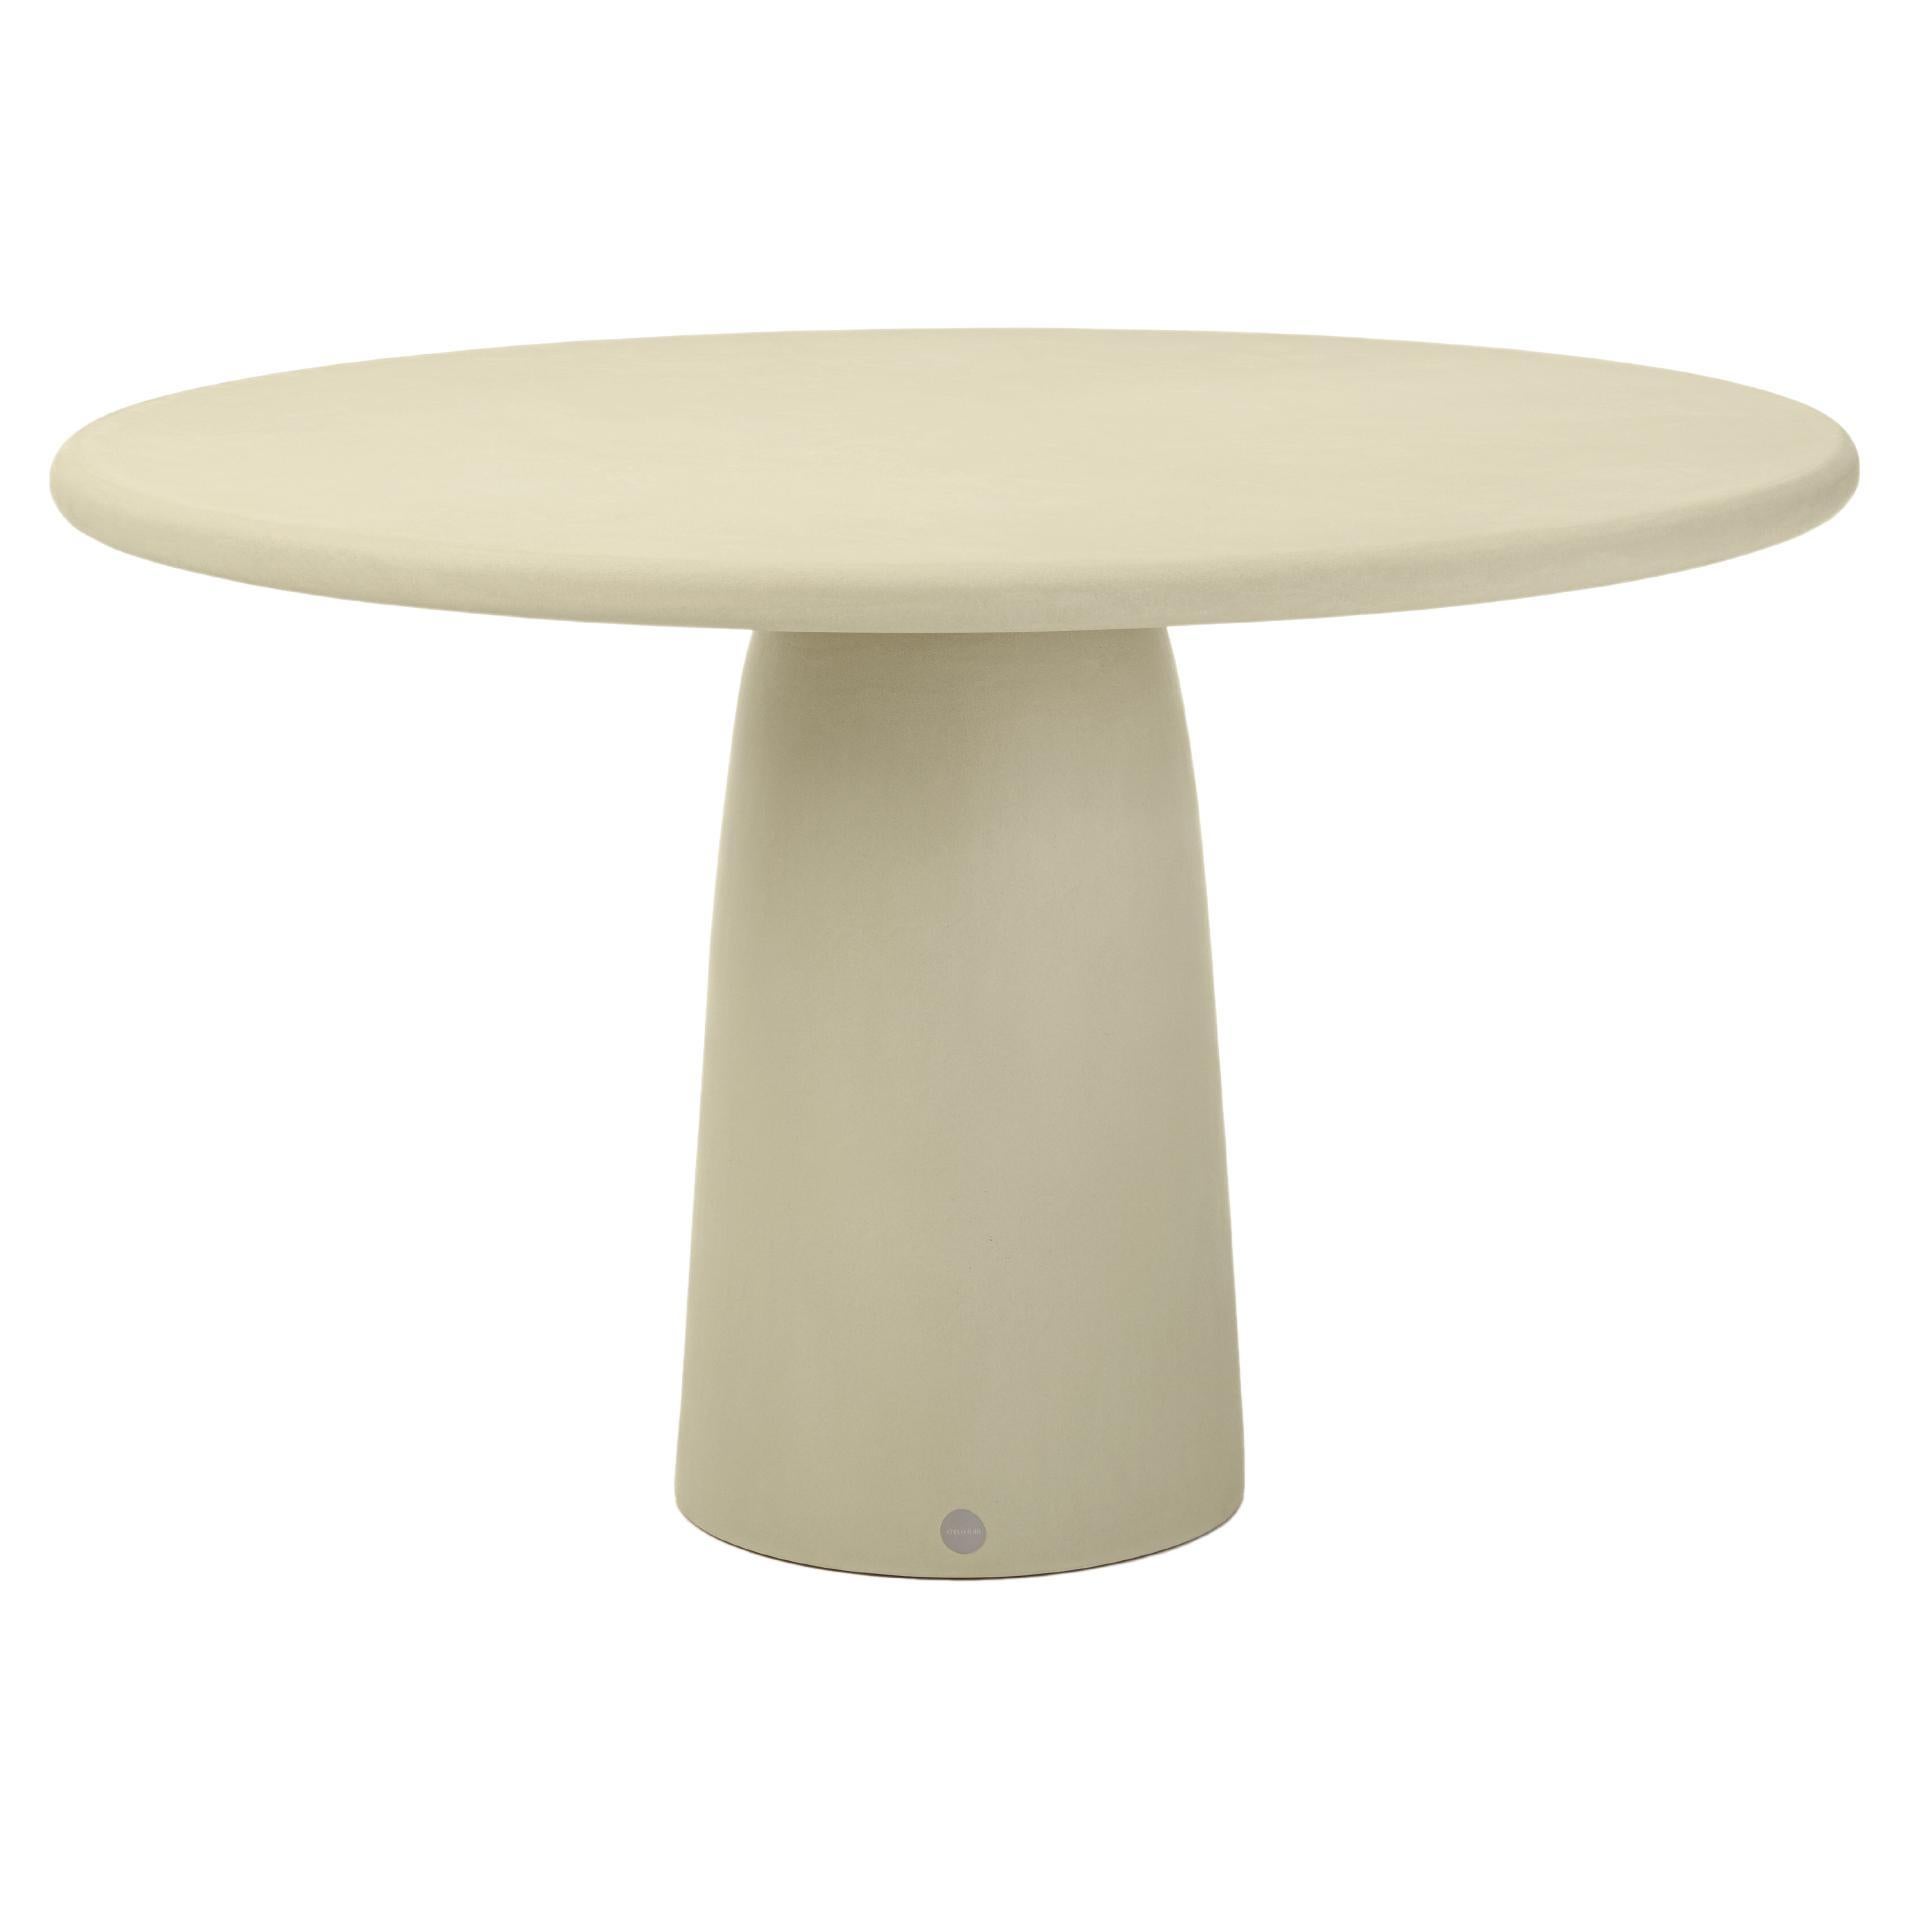 Contemporary Round Natural Plaster "Menhir" Table 140cm by Isabelle Beaumont